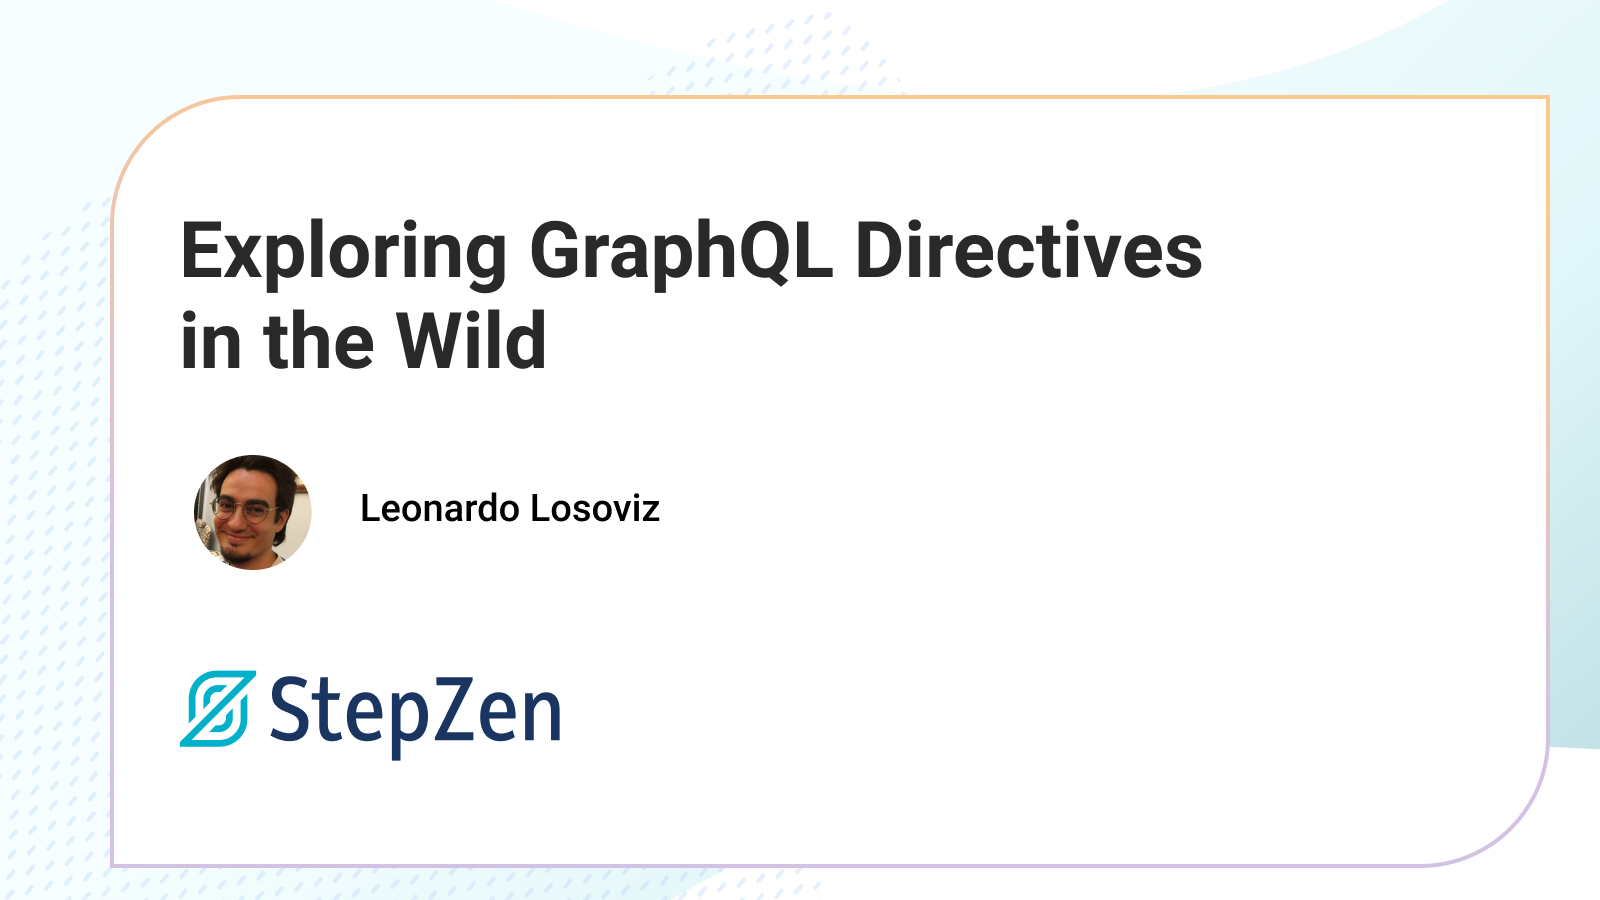 Due to their unrestricted nature, directives are one of GraphQL's more powerful features, enabling GraphQL servers to provide custom capabilities